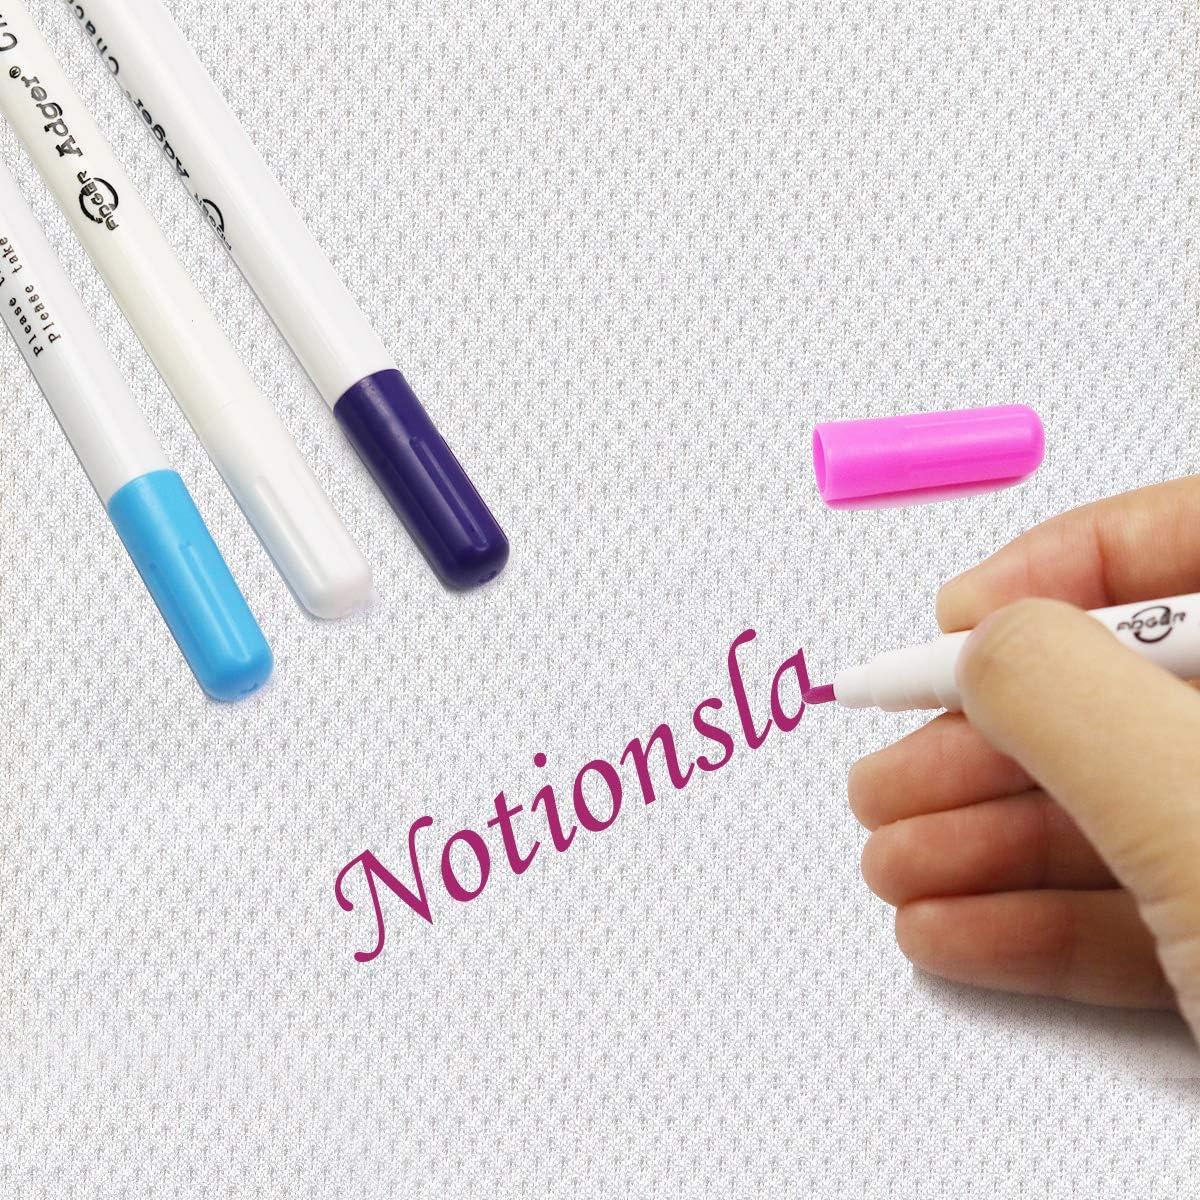 NOTIONSLAND 5 Color Fabric Marking Pens Multi-color Water Soluble Erasable  Pen Sewing Marking & Tracing Tools for DIY/Party